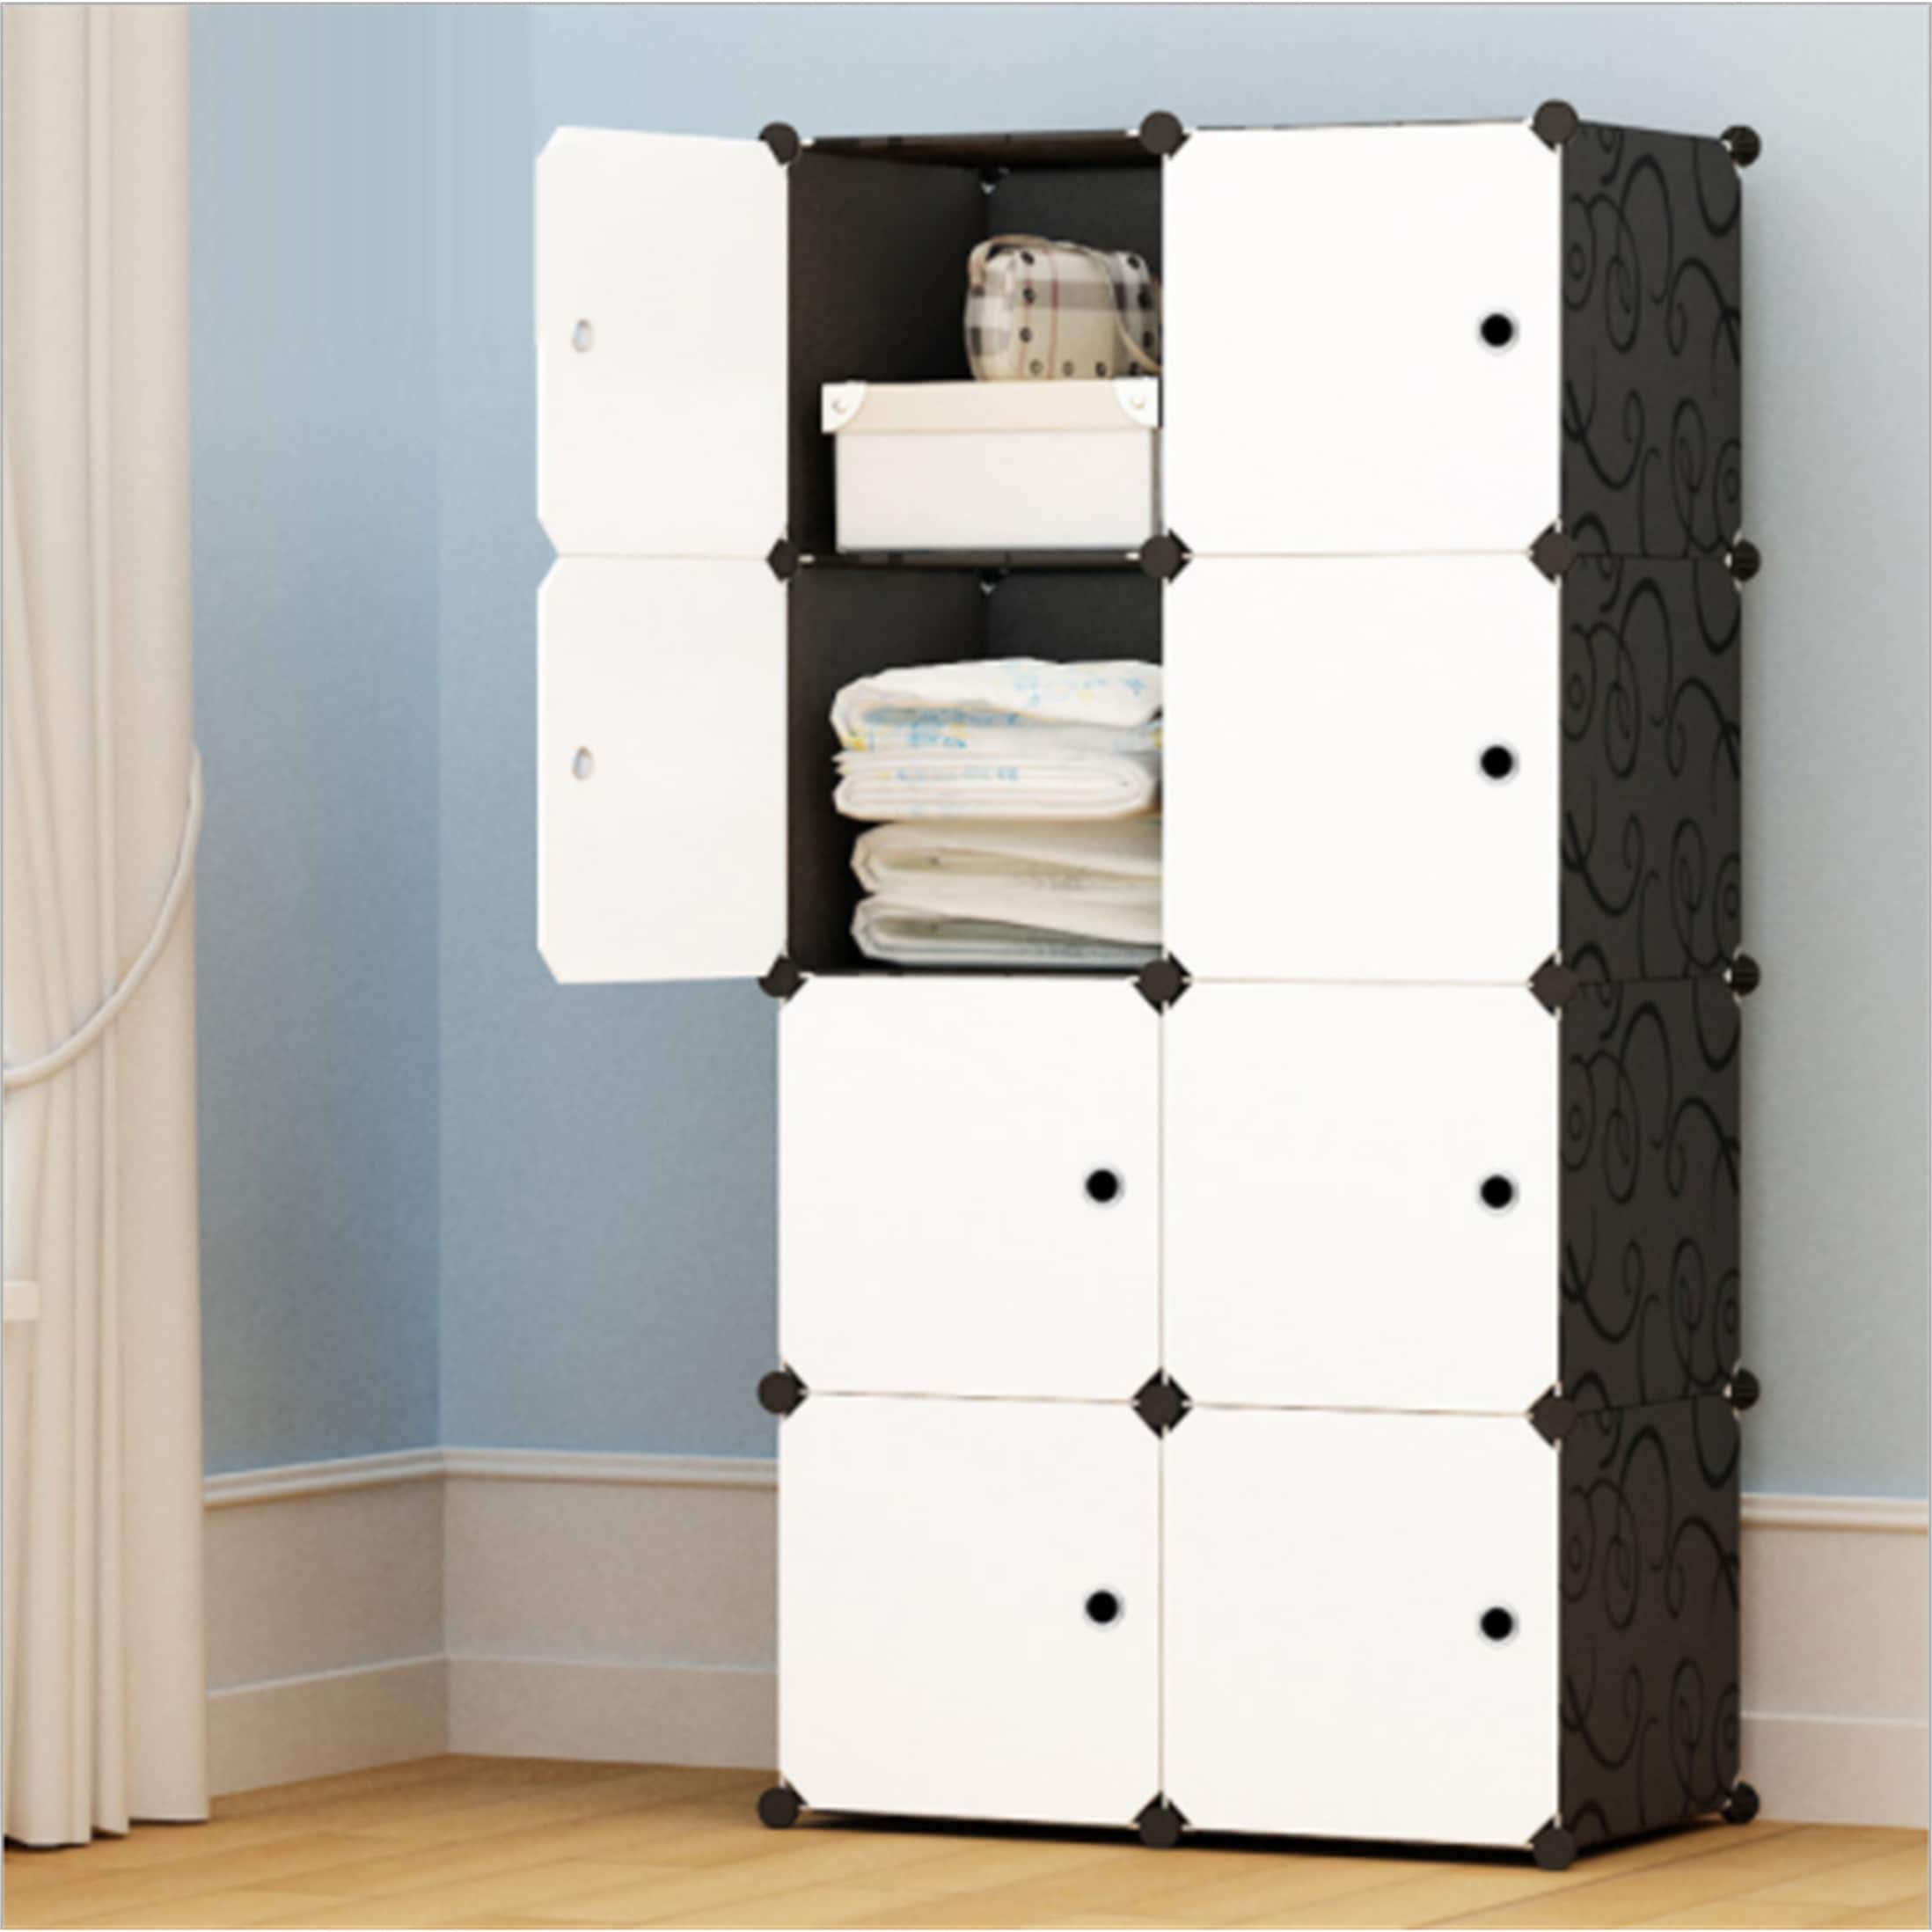 https://ak1.ostkcdn.com/images/products/is/images/direct/d8e9c03ba9723f213234198f178d3e016ee1935e/8-Cube-Stackable-Plastic-Cube-Storage-Shelves-Modular-Cabinet-Hanging.jpg